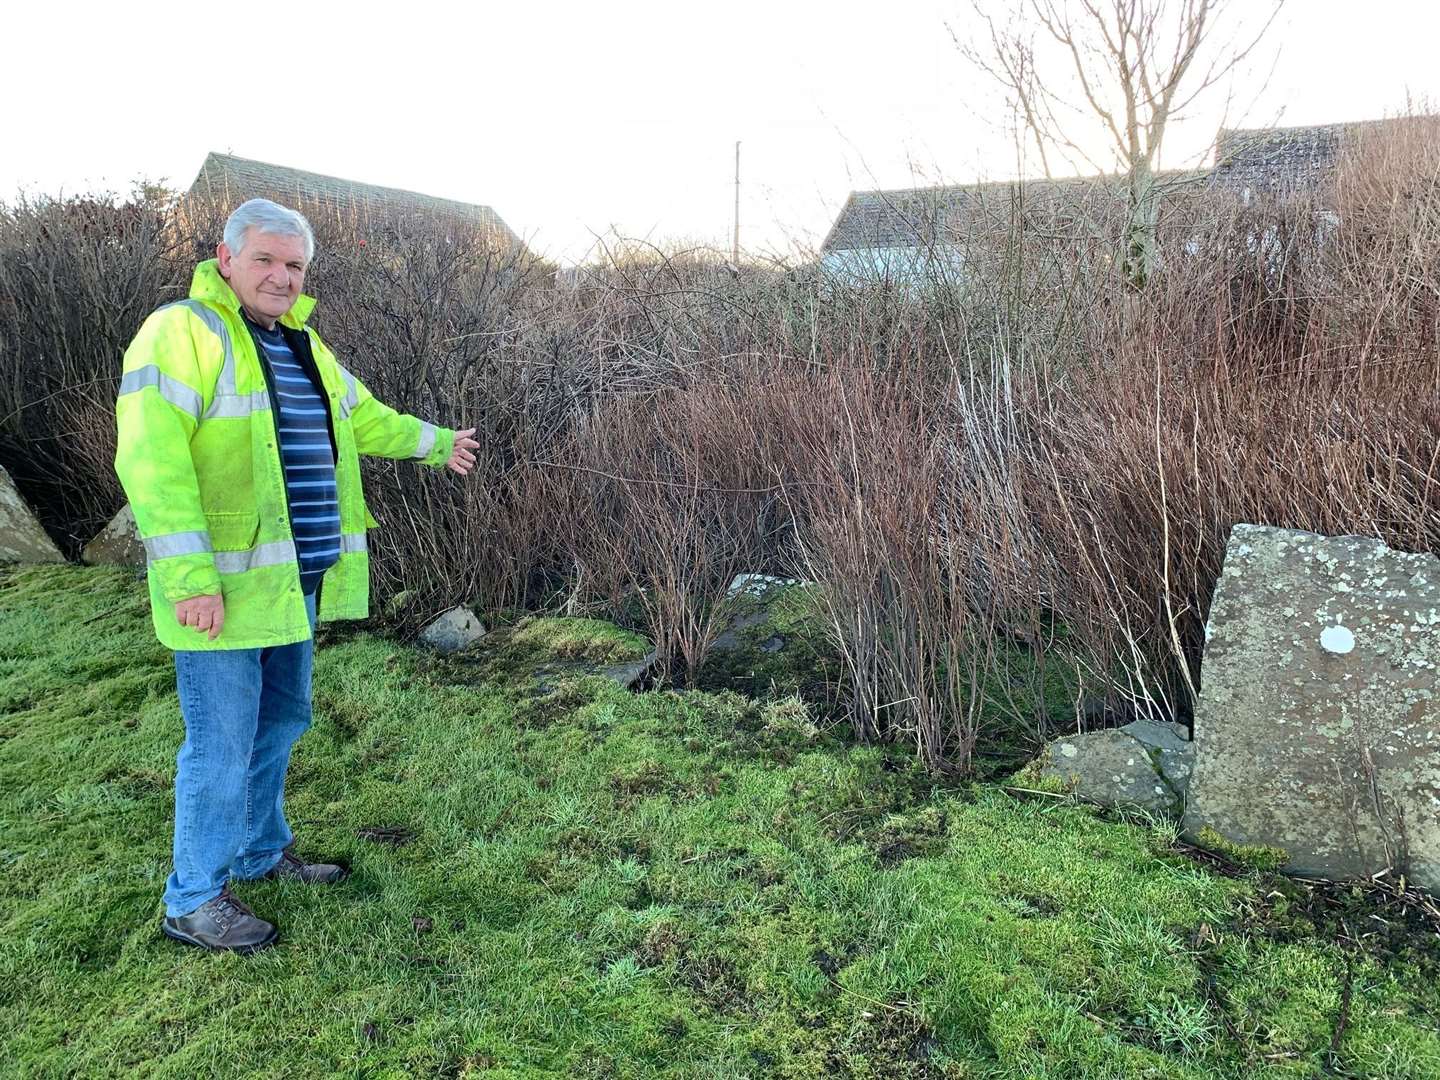 John Crofts beside his flagstone wall which has been struck by vehicles four times in the space of 15 years.